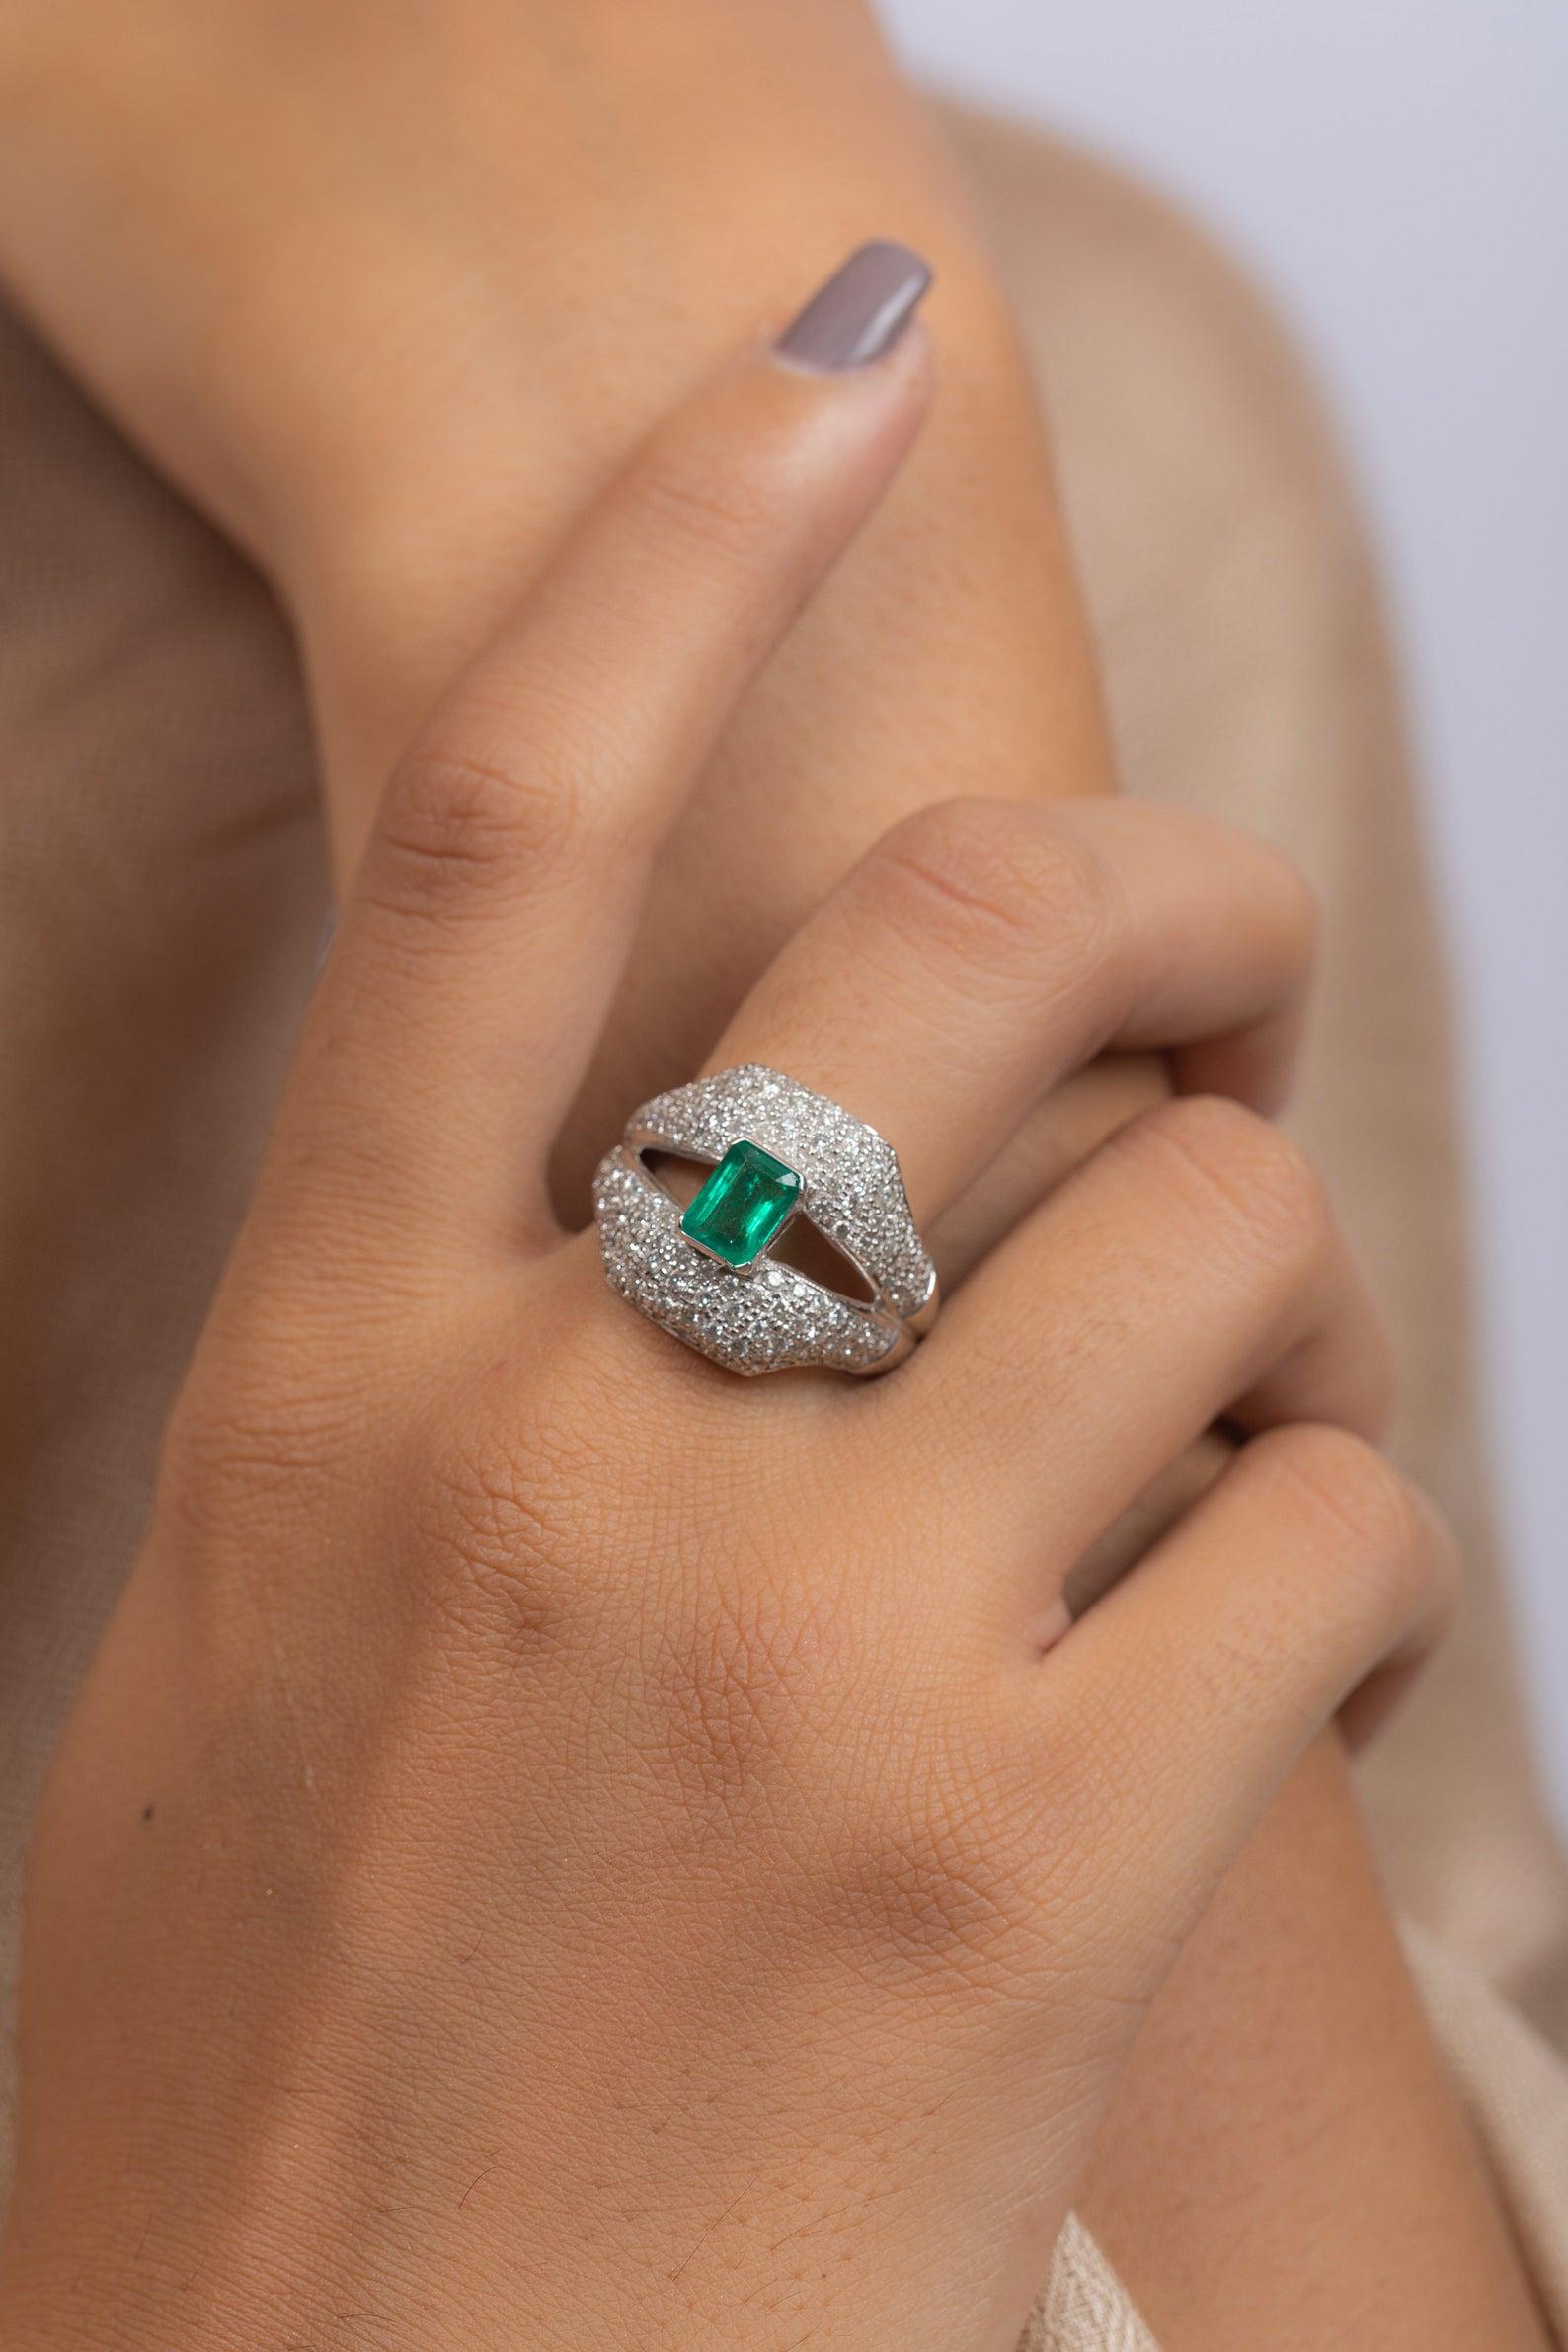 This ring has been meticulously crafted from 14-karat gold.  It is hand set with 1.0 carat emerald & 1.55 carats of sparkling diamonds. 

The ring is a size 7 and may be resized to larger or smaller upon request. 
FOLLOW  MEGHNA JEWELS storefront to